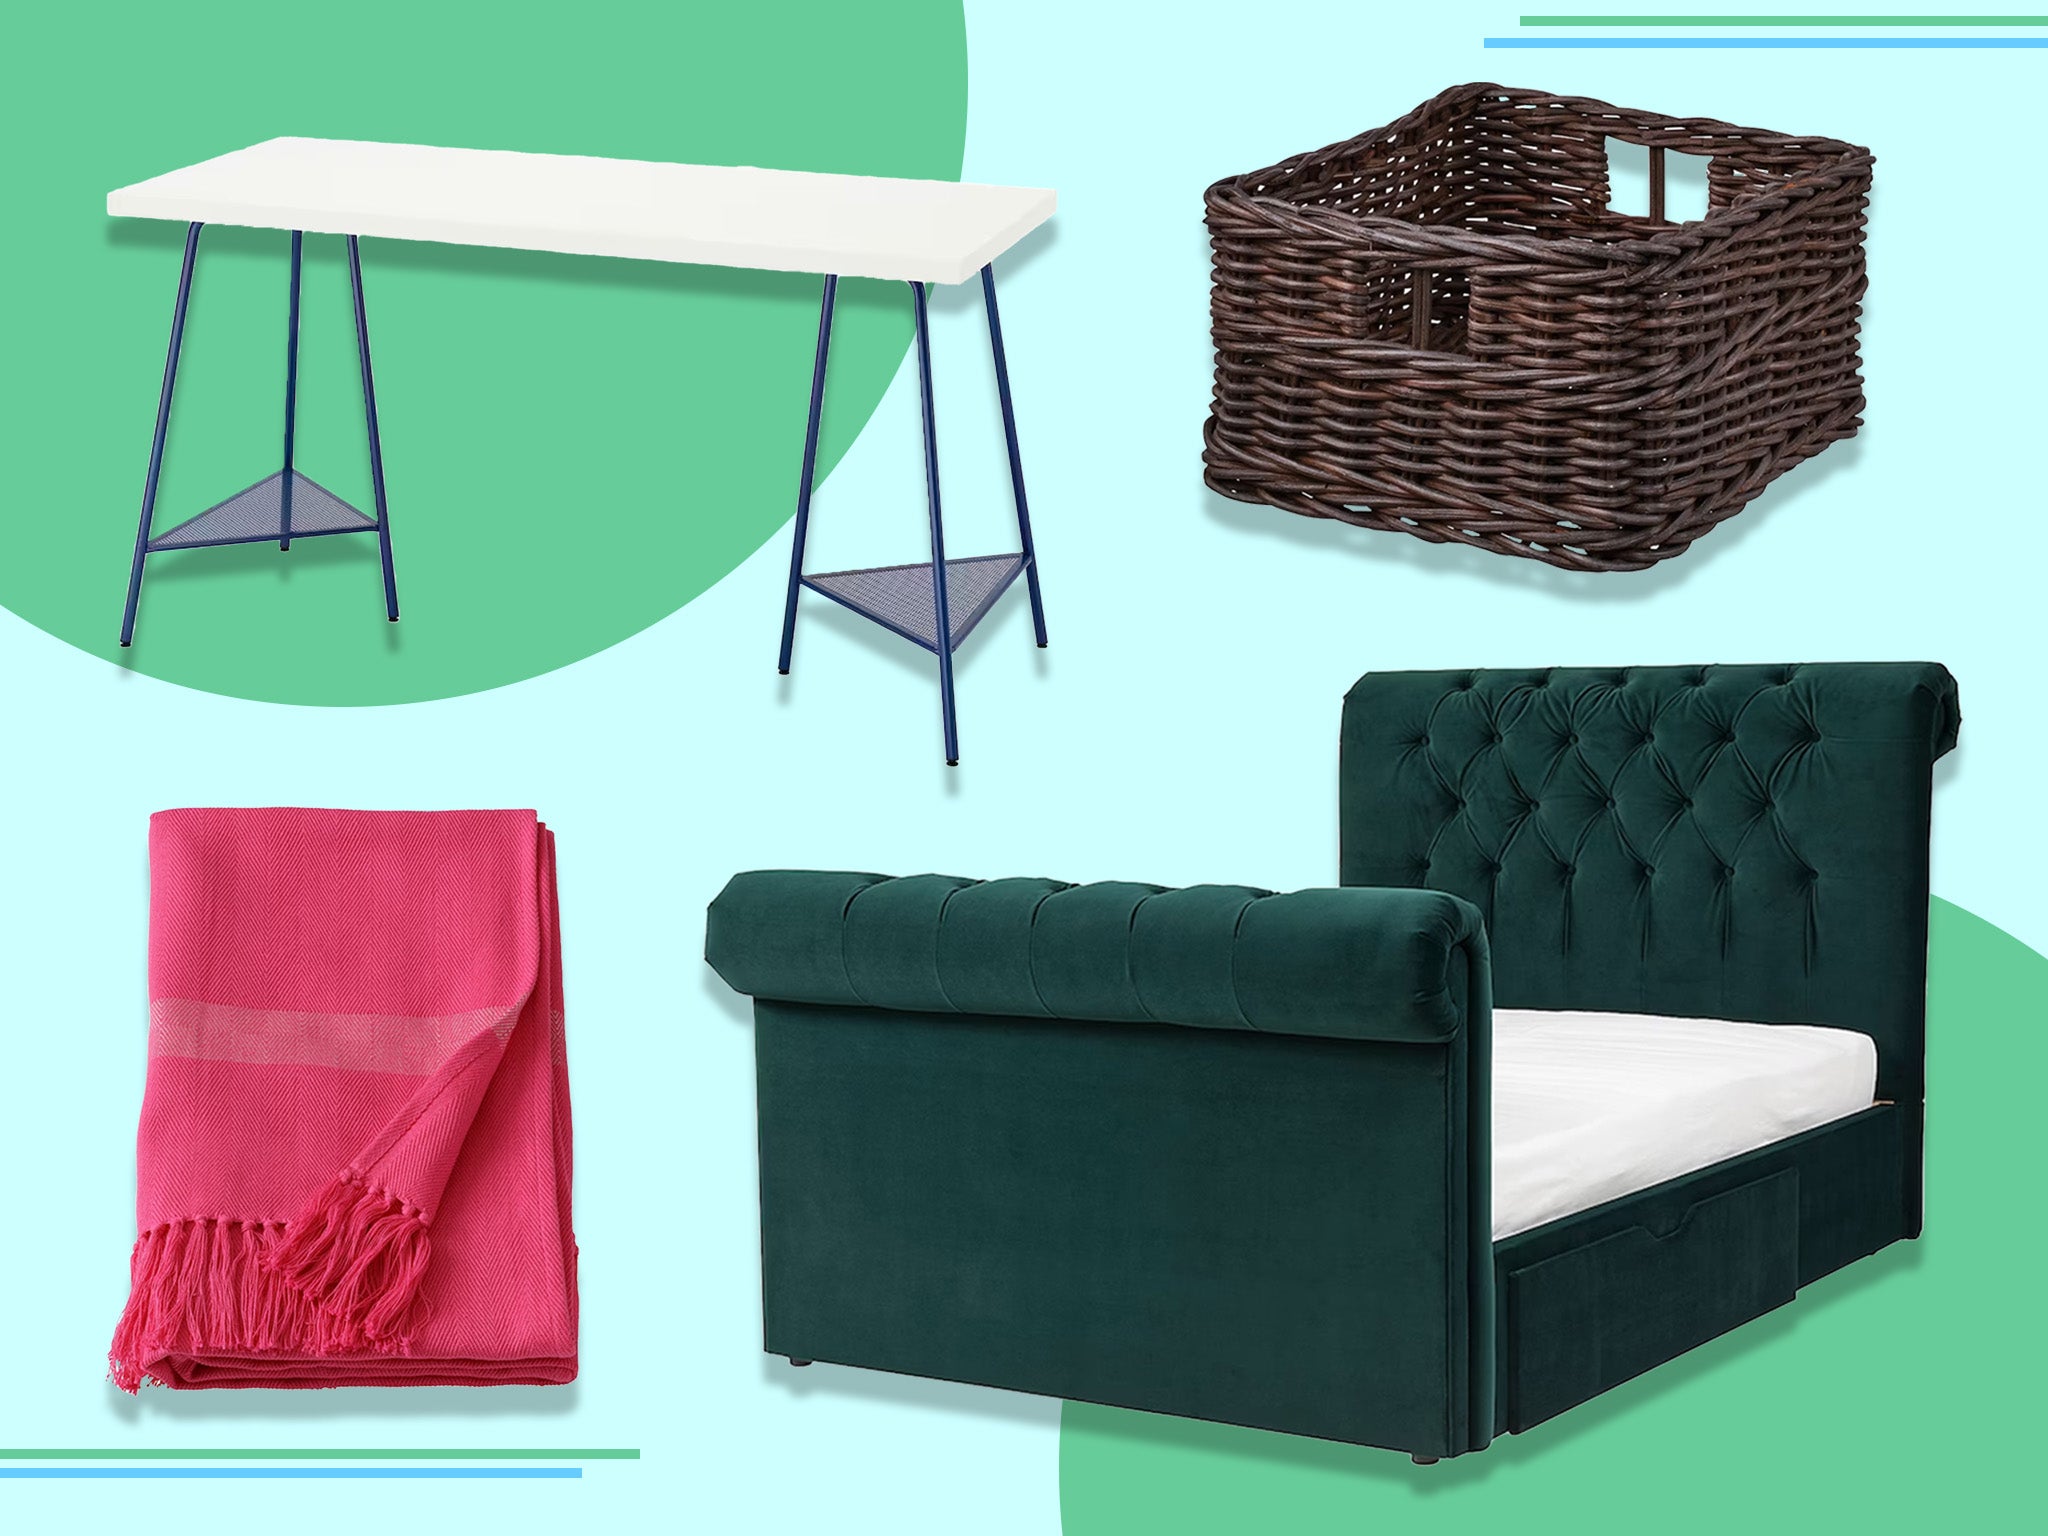 You can snap up cracking discounts from the Swedish furniture aficionado untill 10 July